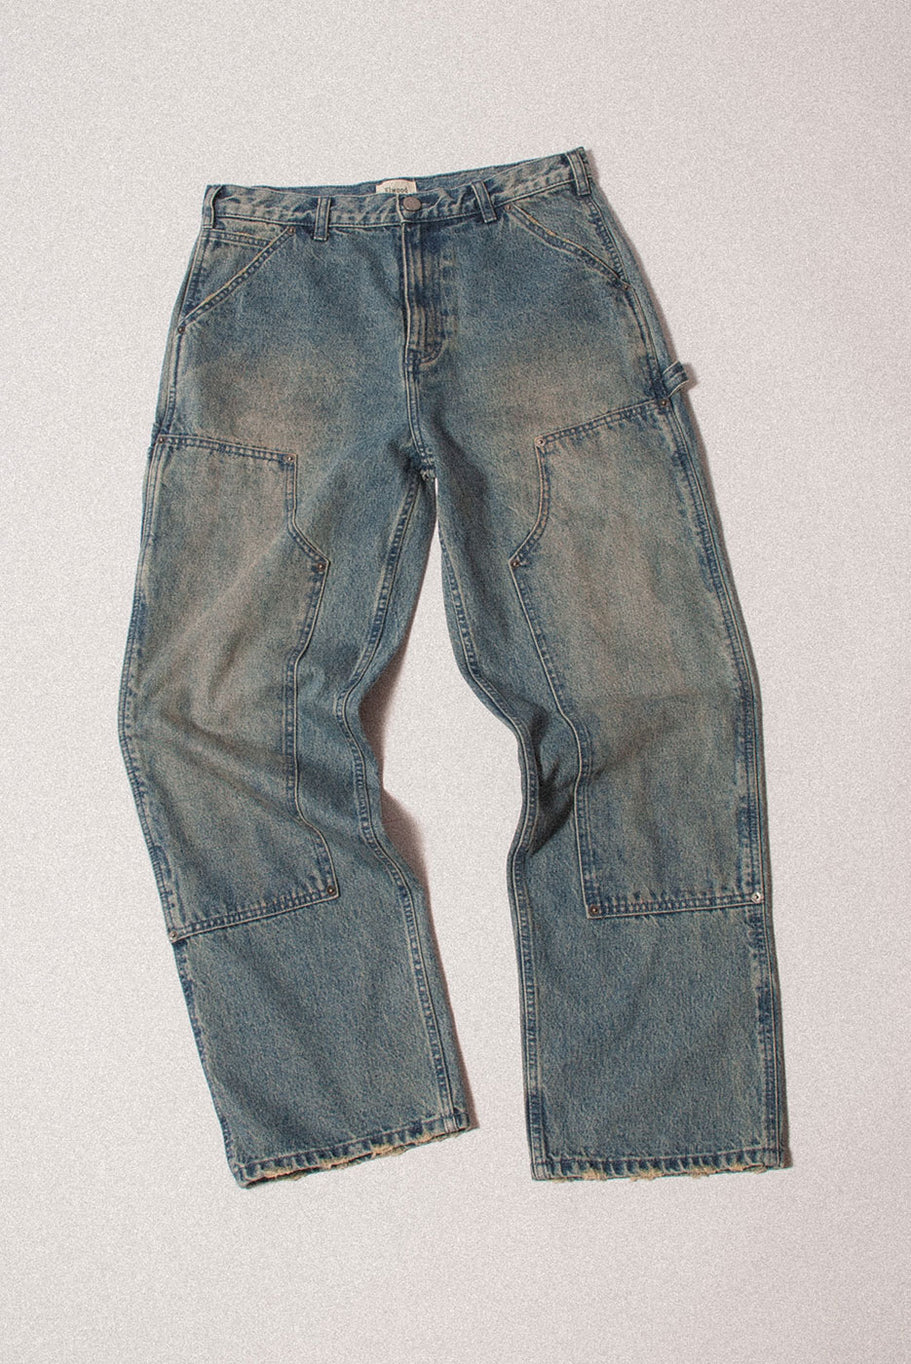 Elwood Industry Pant - Dirty Wash